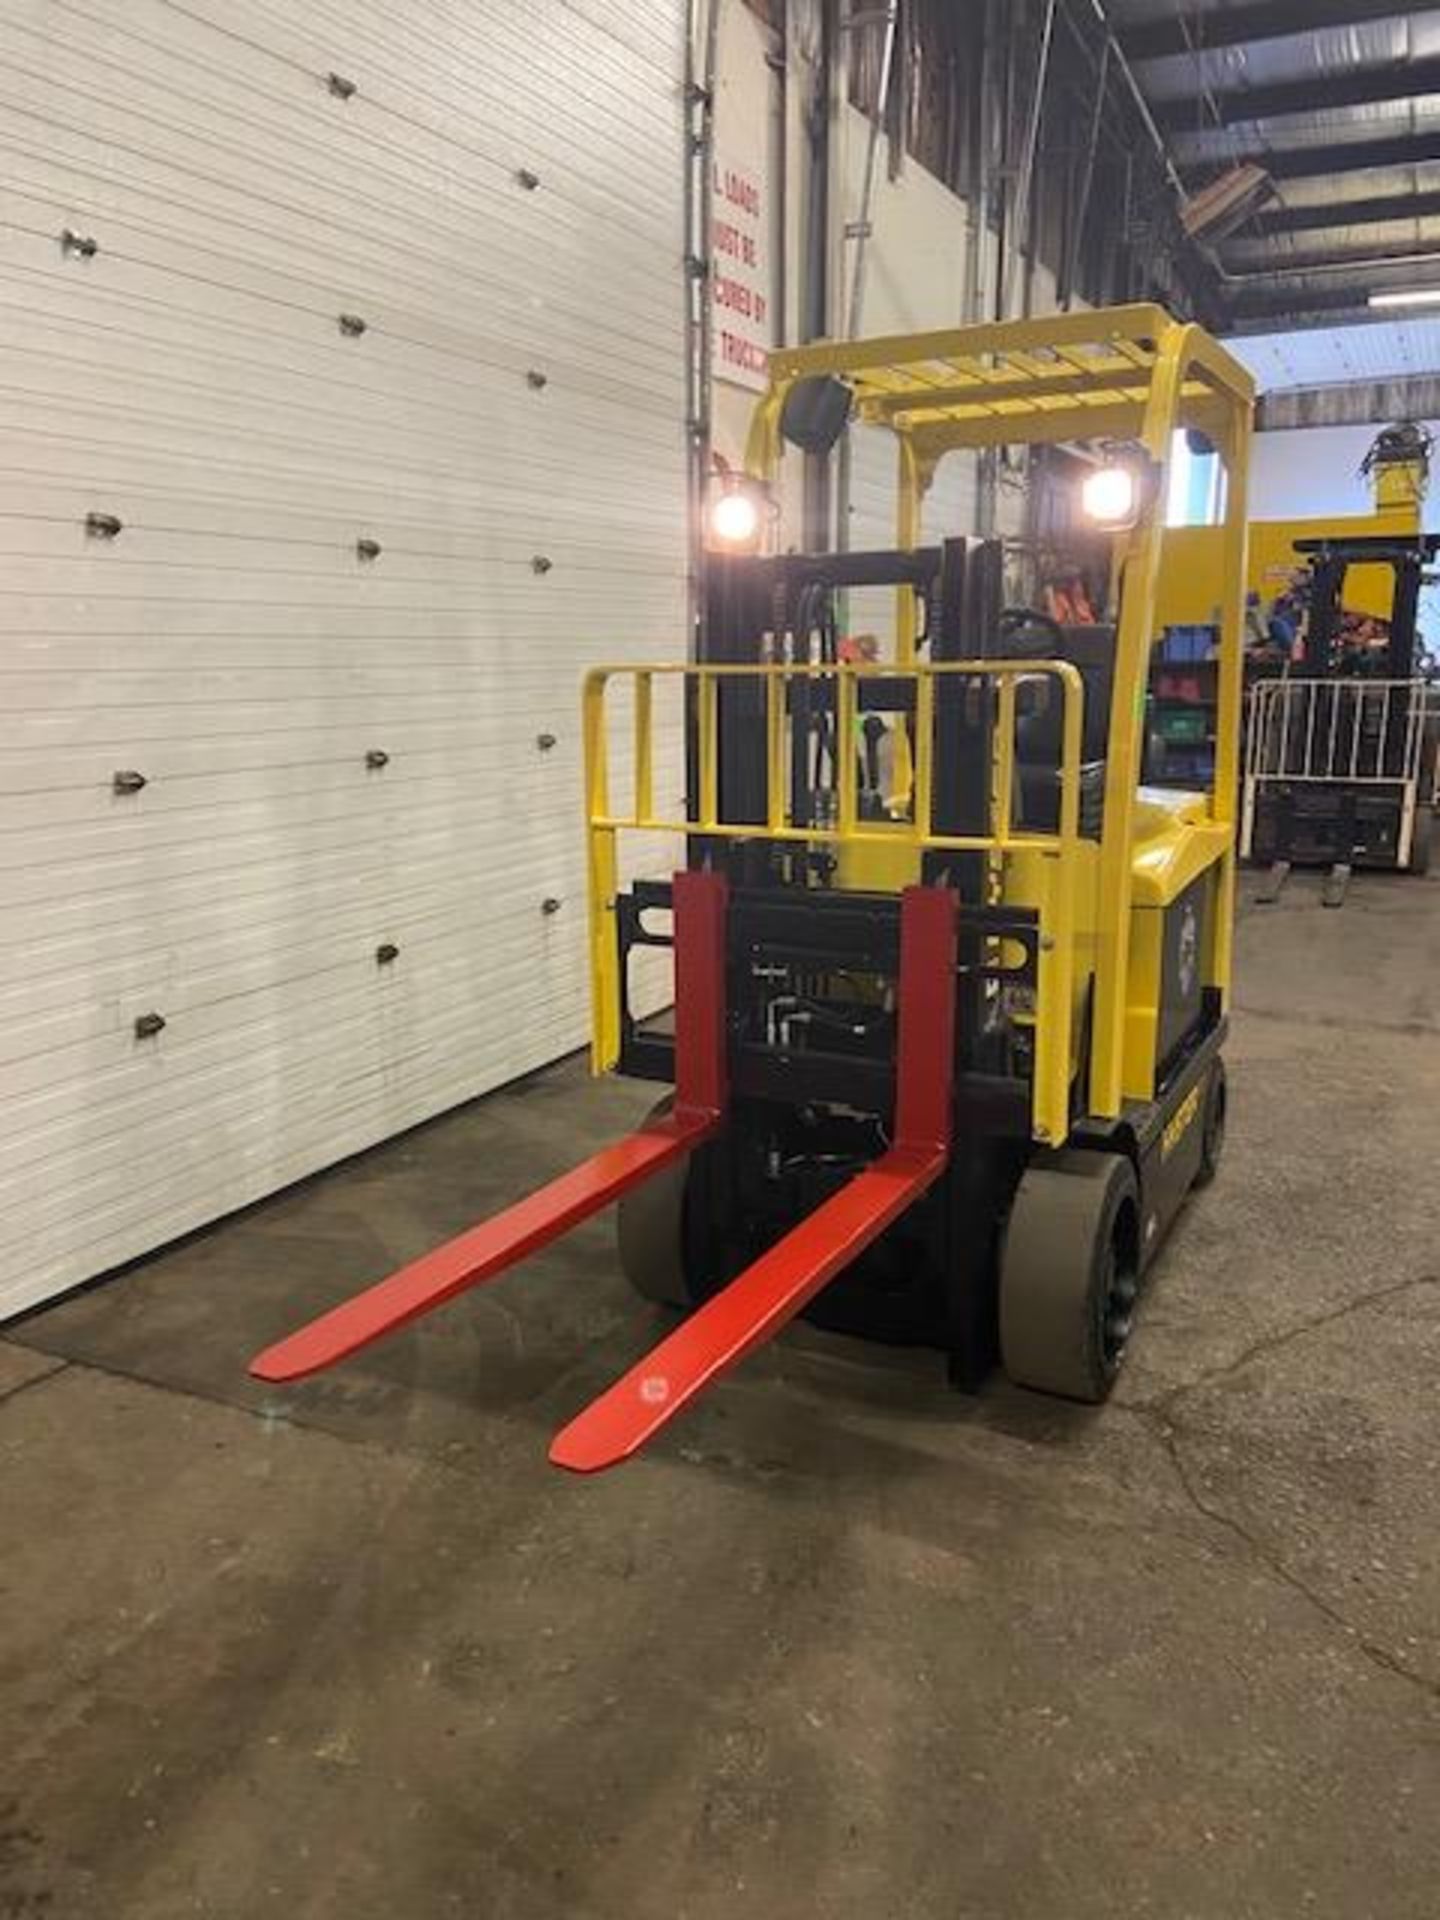 FREE CUSTOMS - 2013 Hyster 5000lbs Capacity Forklift Electric with TRUCKER MAST LOWERED with - Image 2 of 3